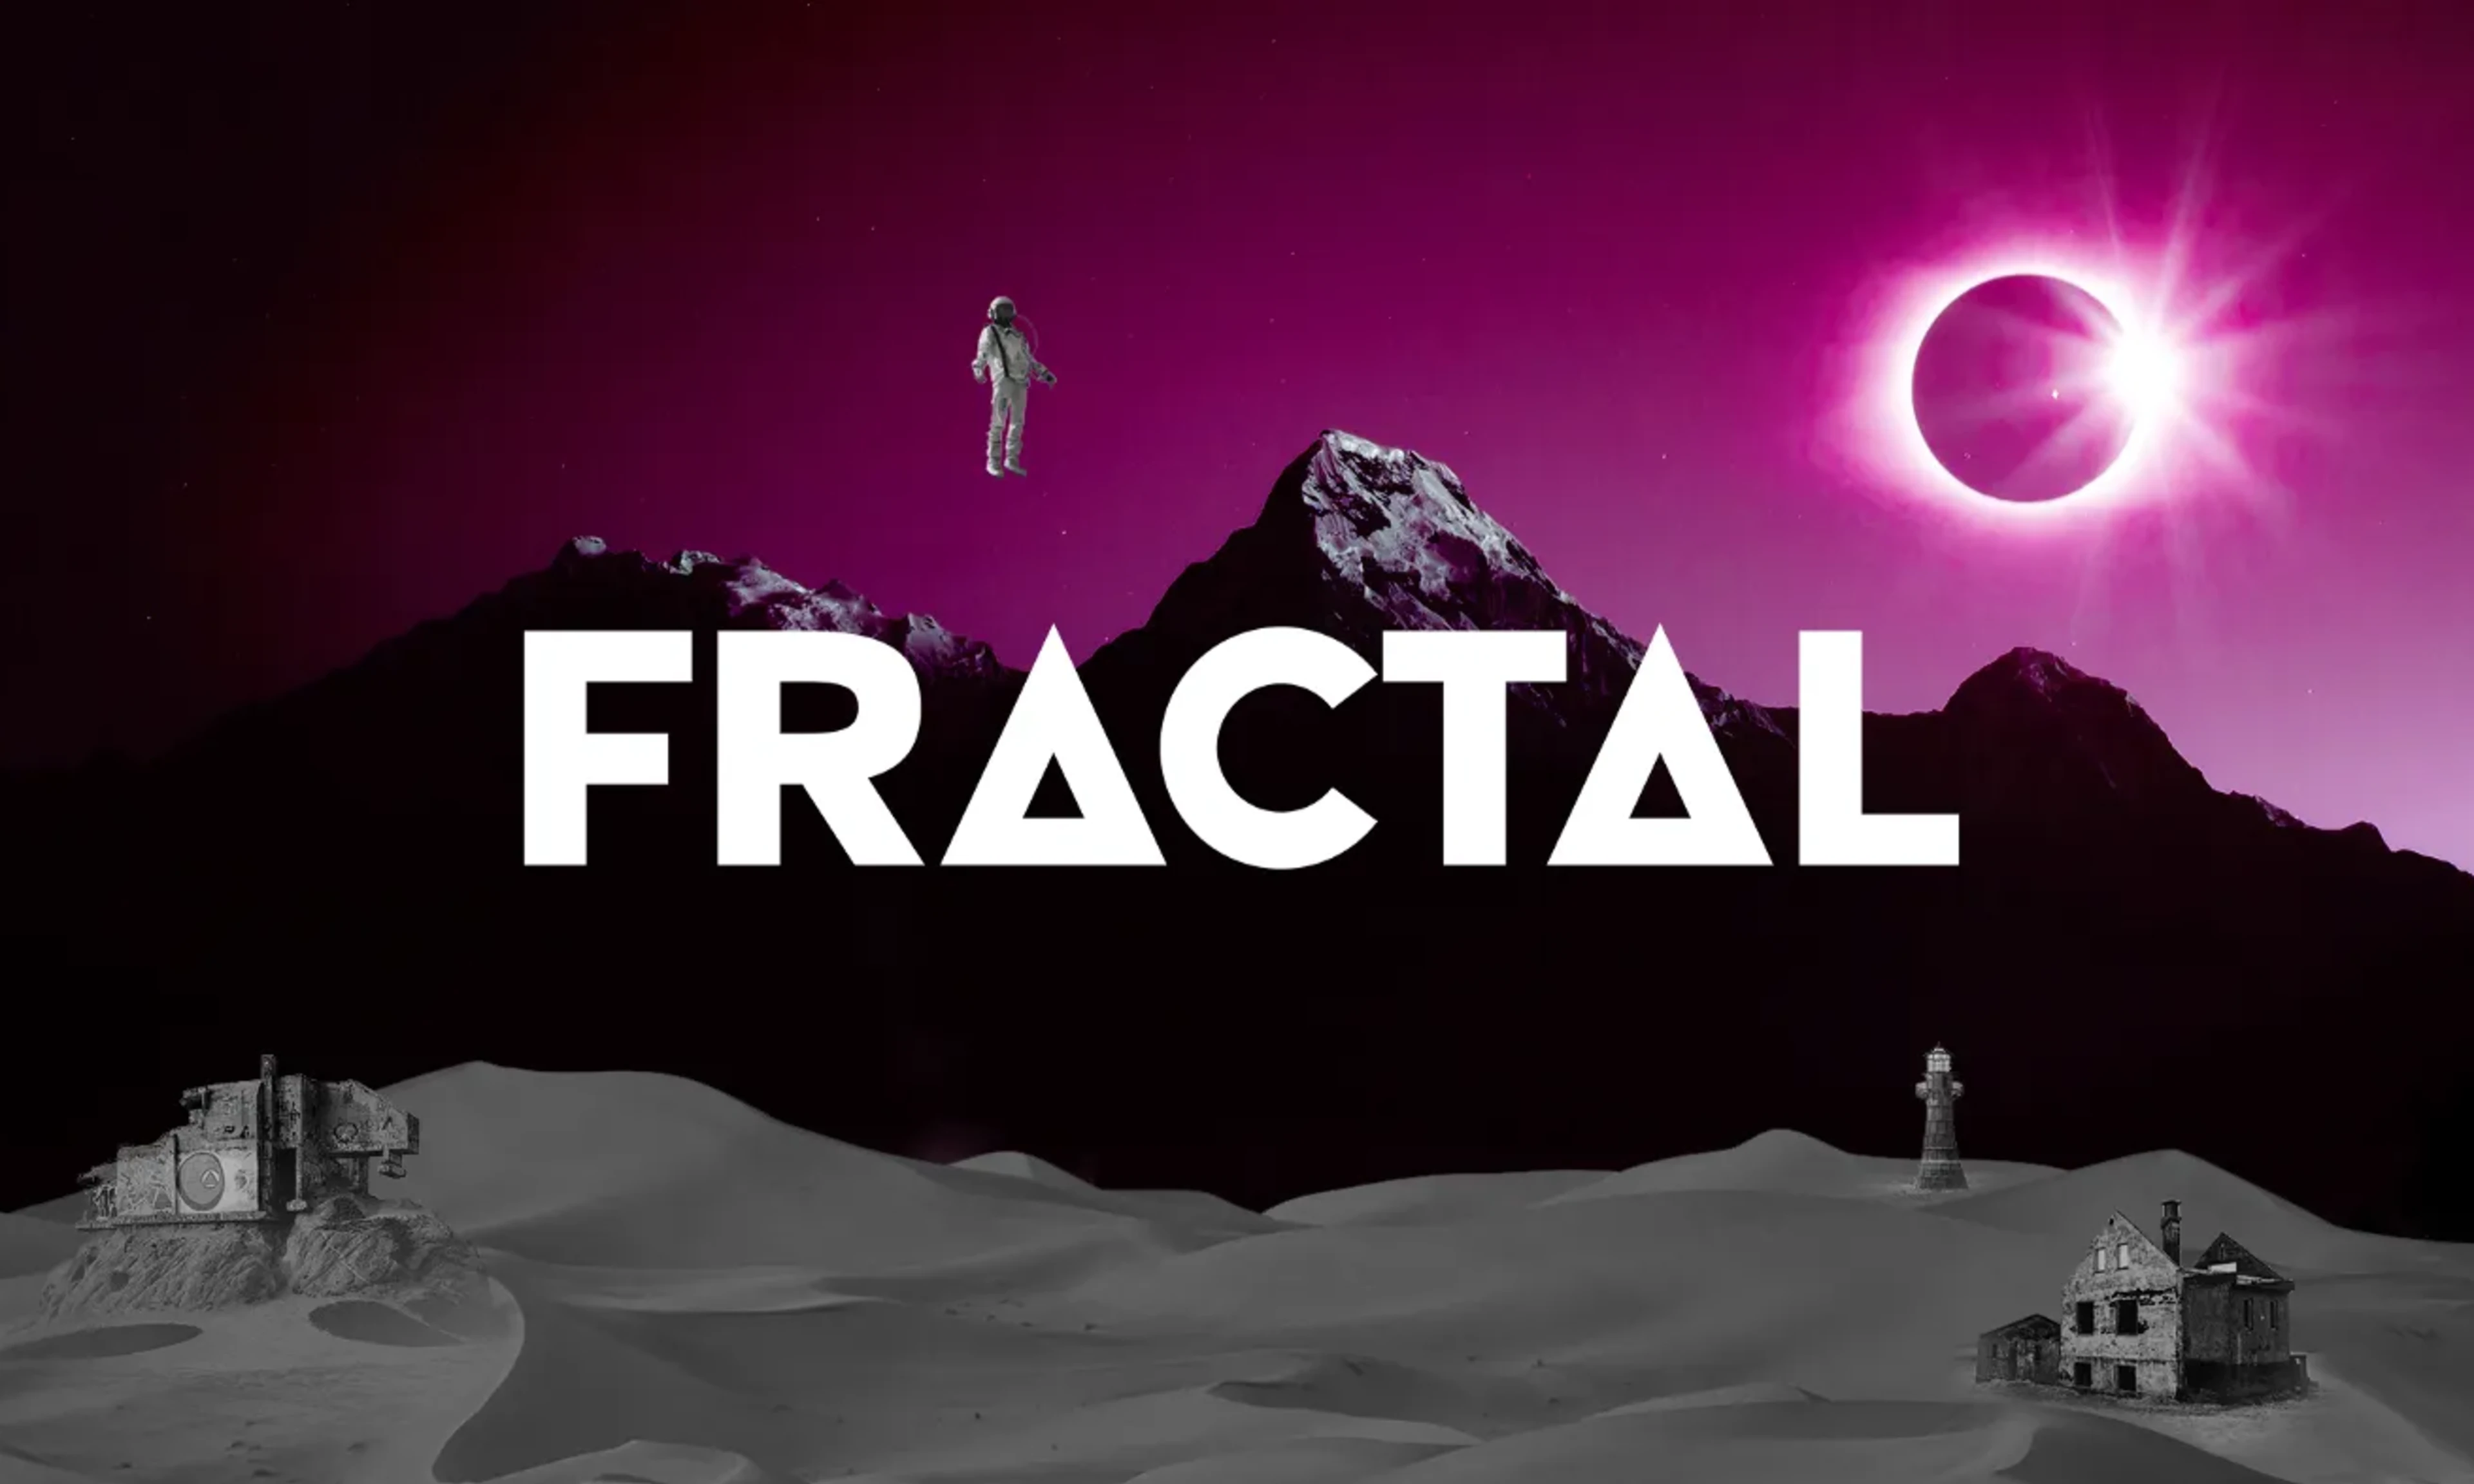 Twitch Co-Founder's Fractal Launches Tools to Help Devs Build NFT Games